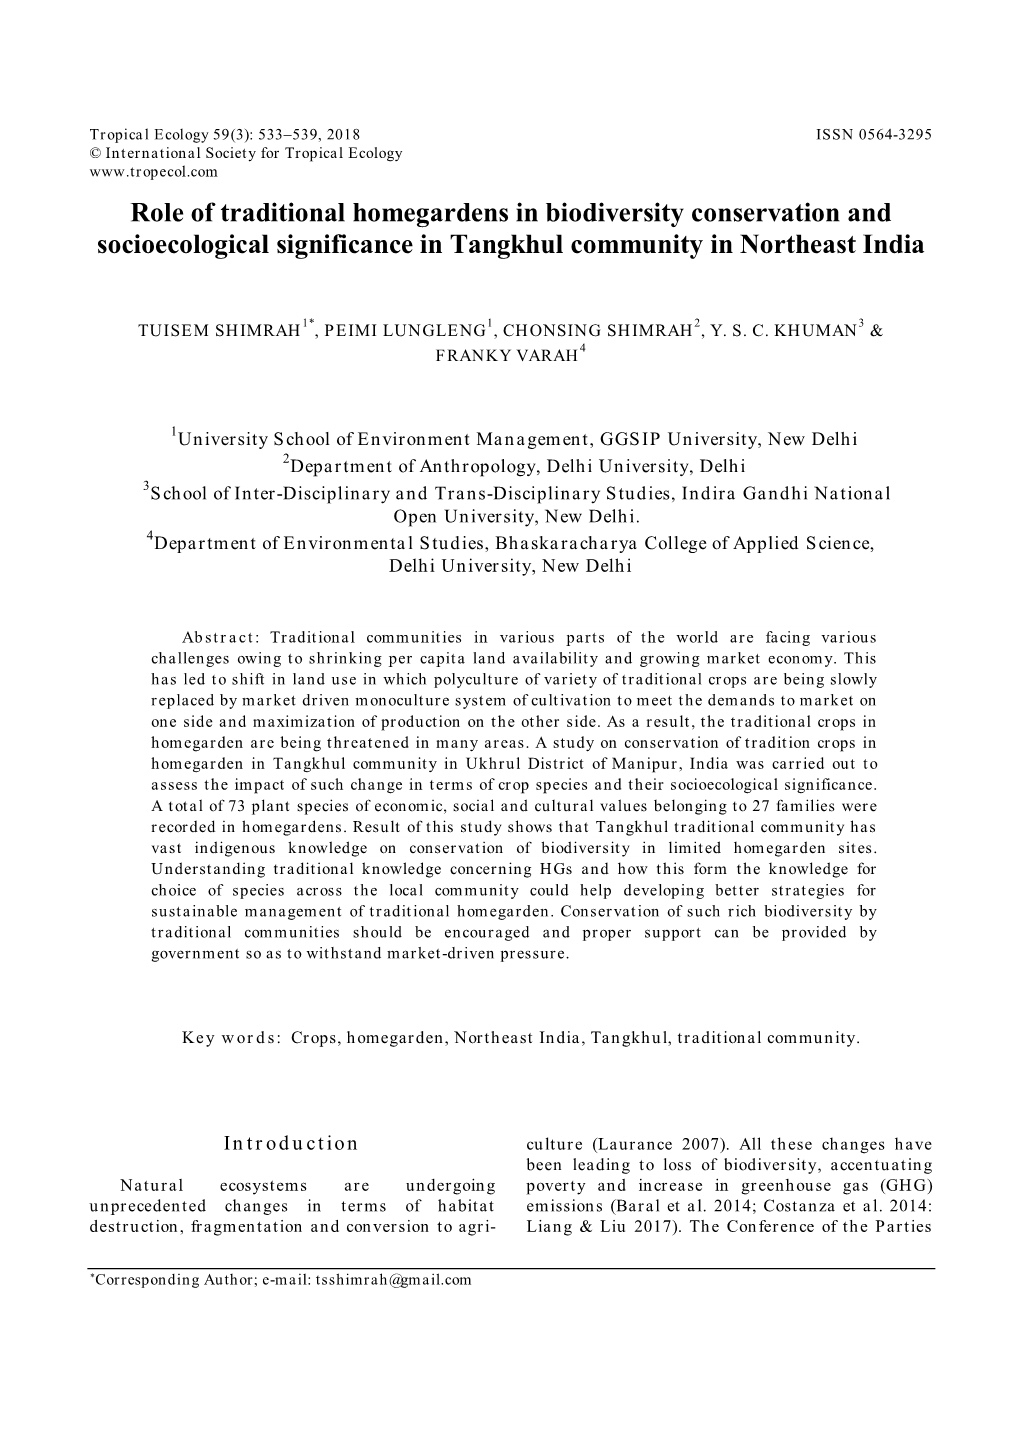 Role of Traditional Homegardens in Biodiversity Conservation and Socioecological Significance in Tangkhul Community in Northeast India